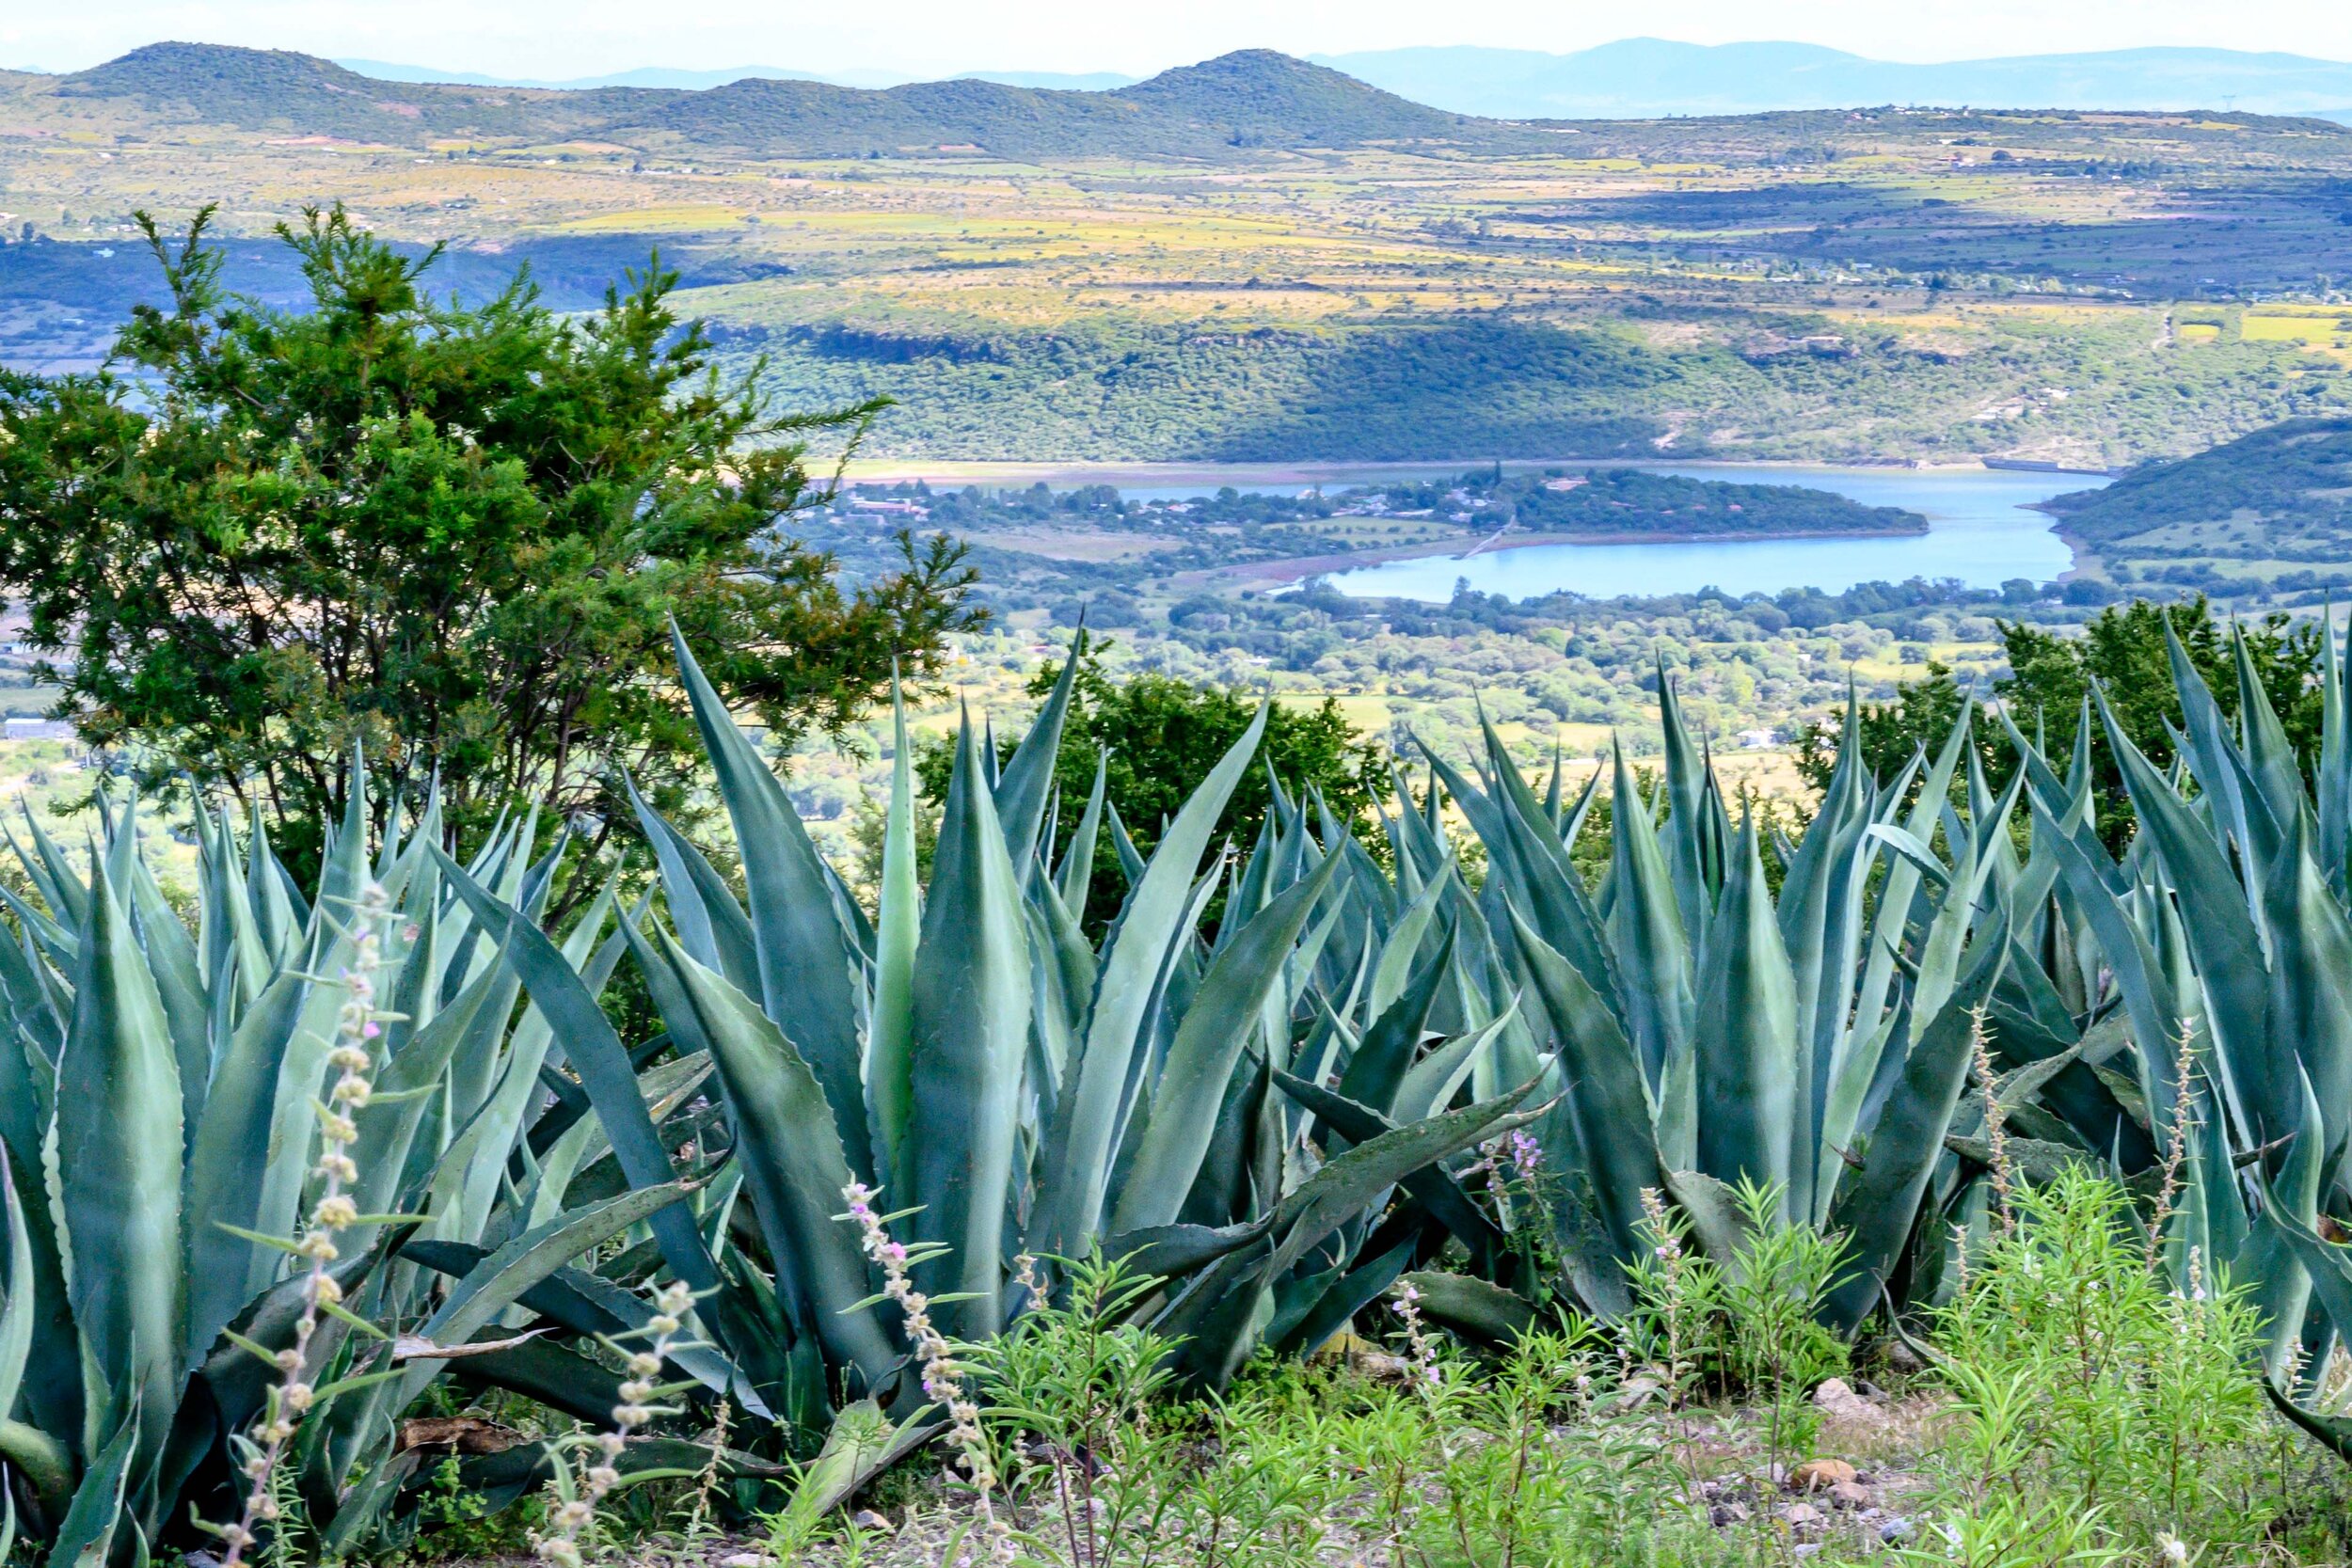 Maguey (Agave) plants used to make Pulque, an ancient alcoholic beverage 